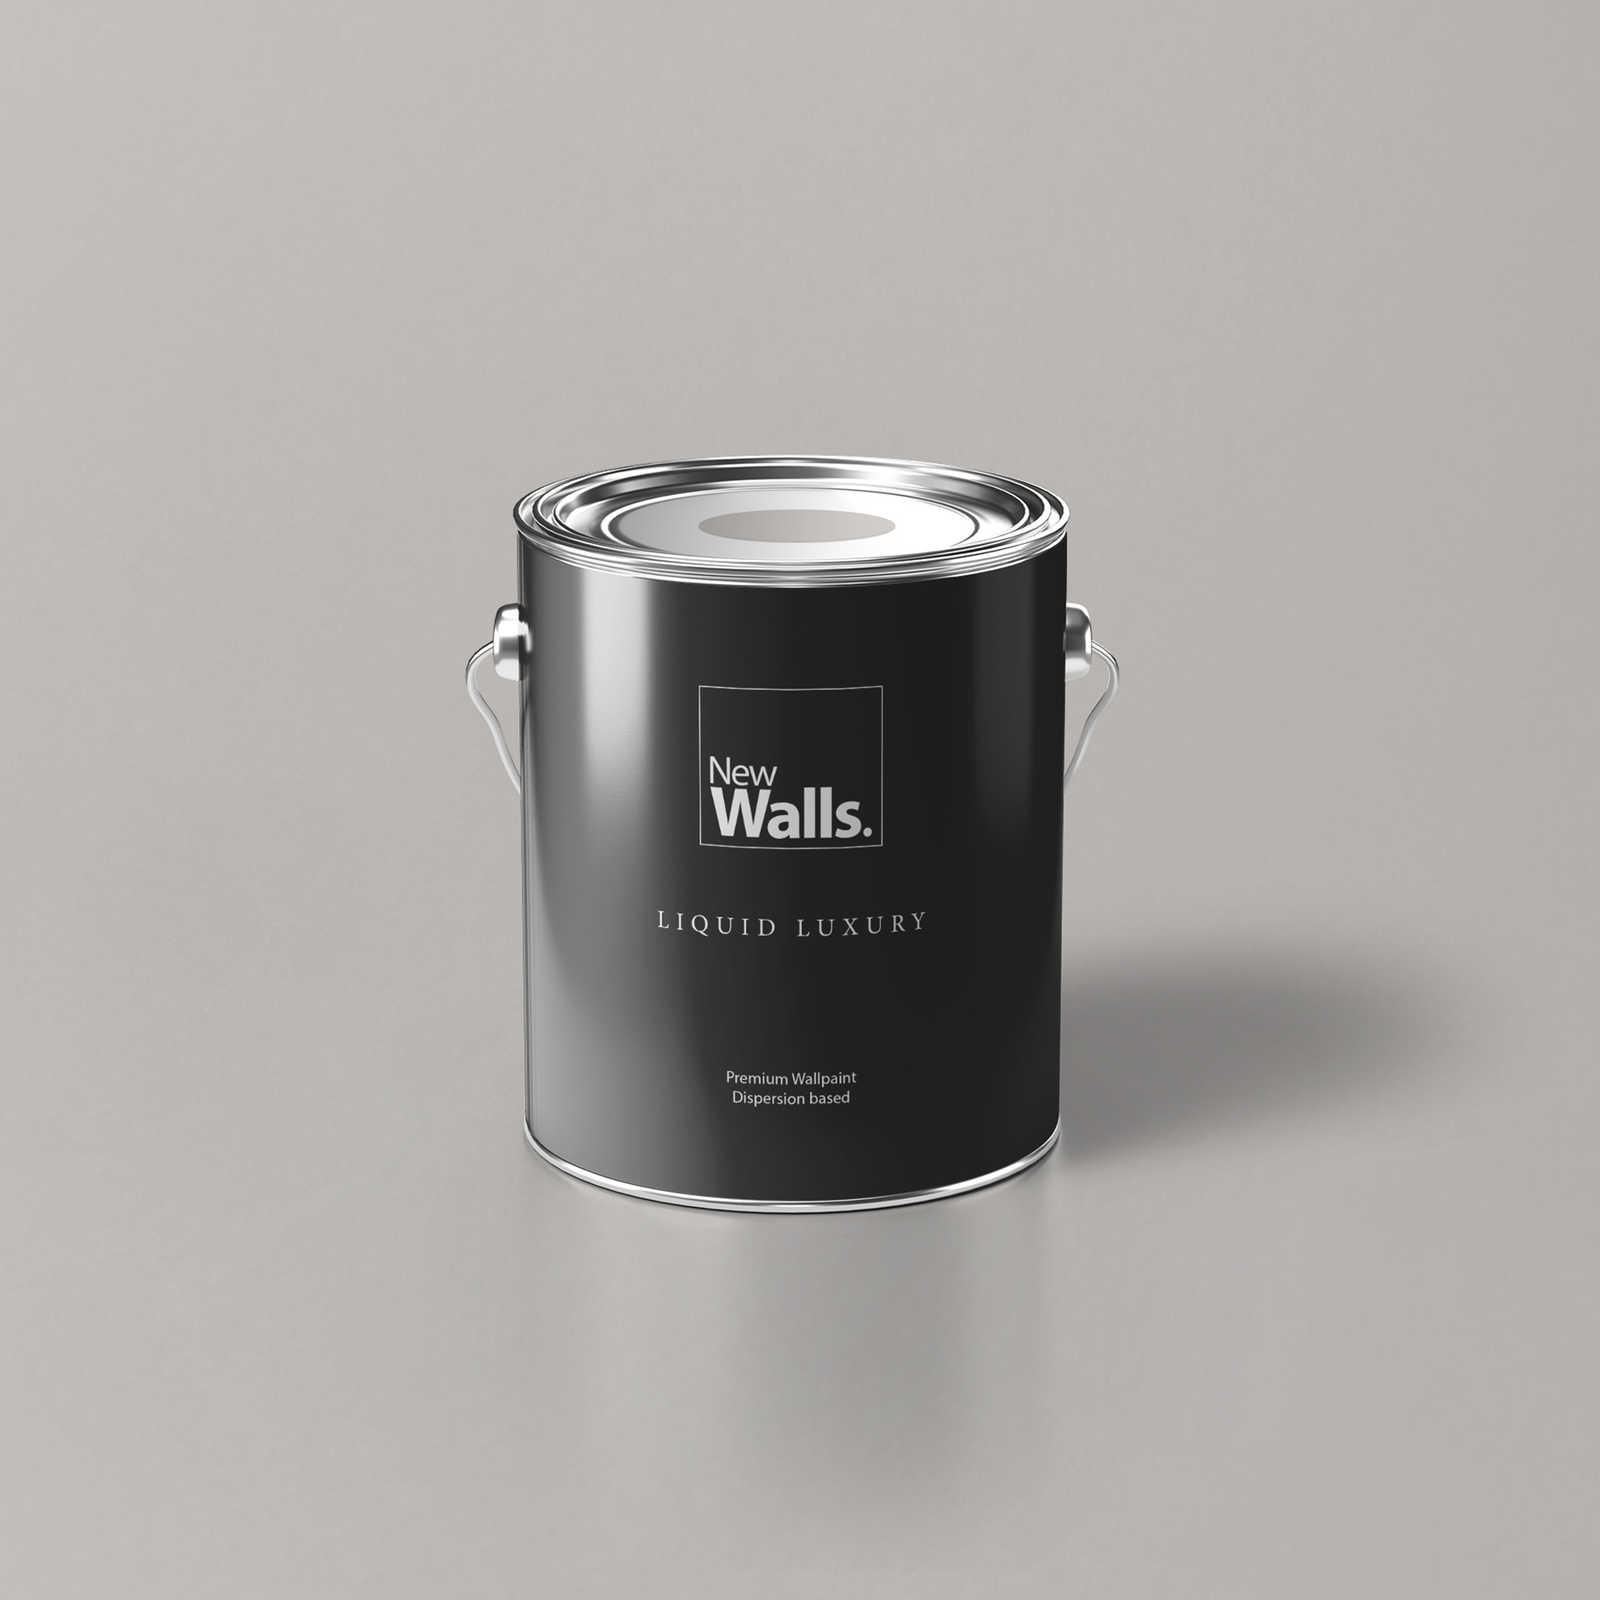 Premium Wall Paint soothing light grey »Creamy Grey« NW110 – 2.5 litre
